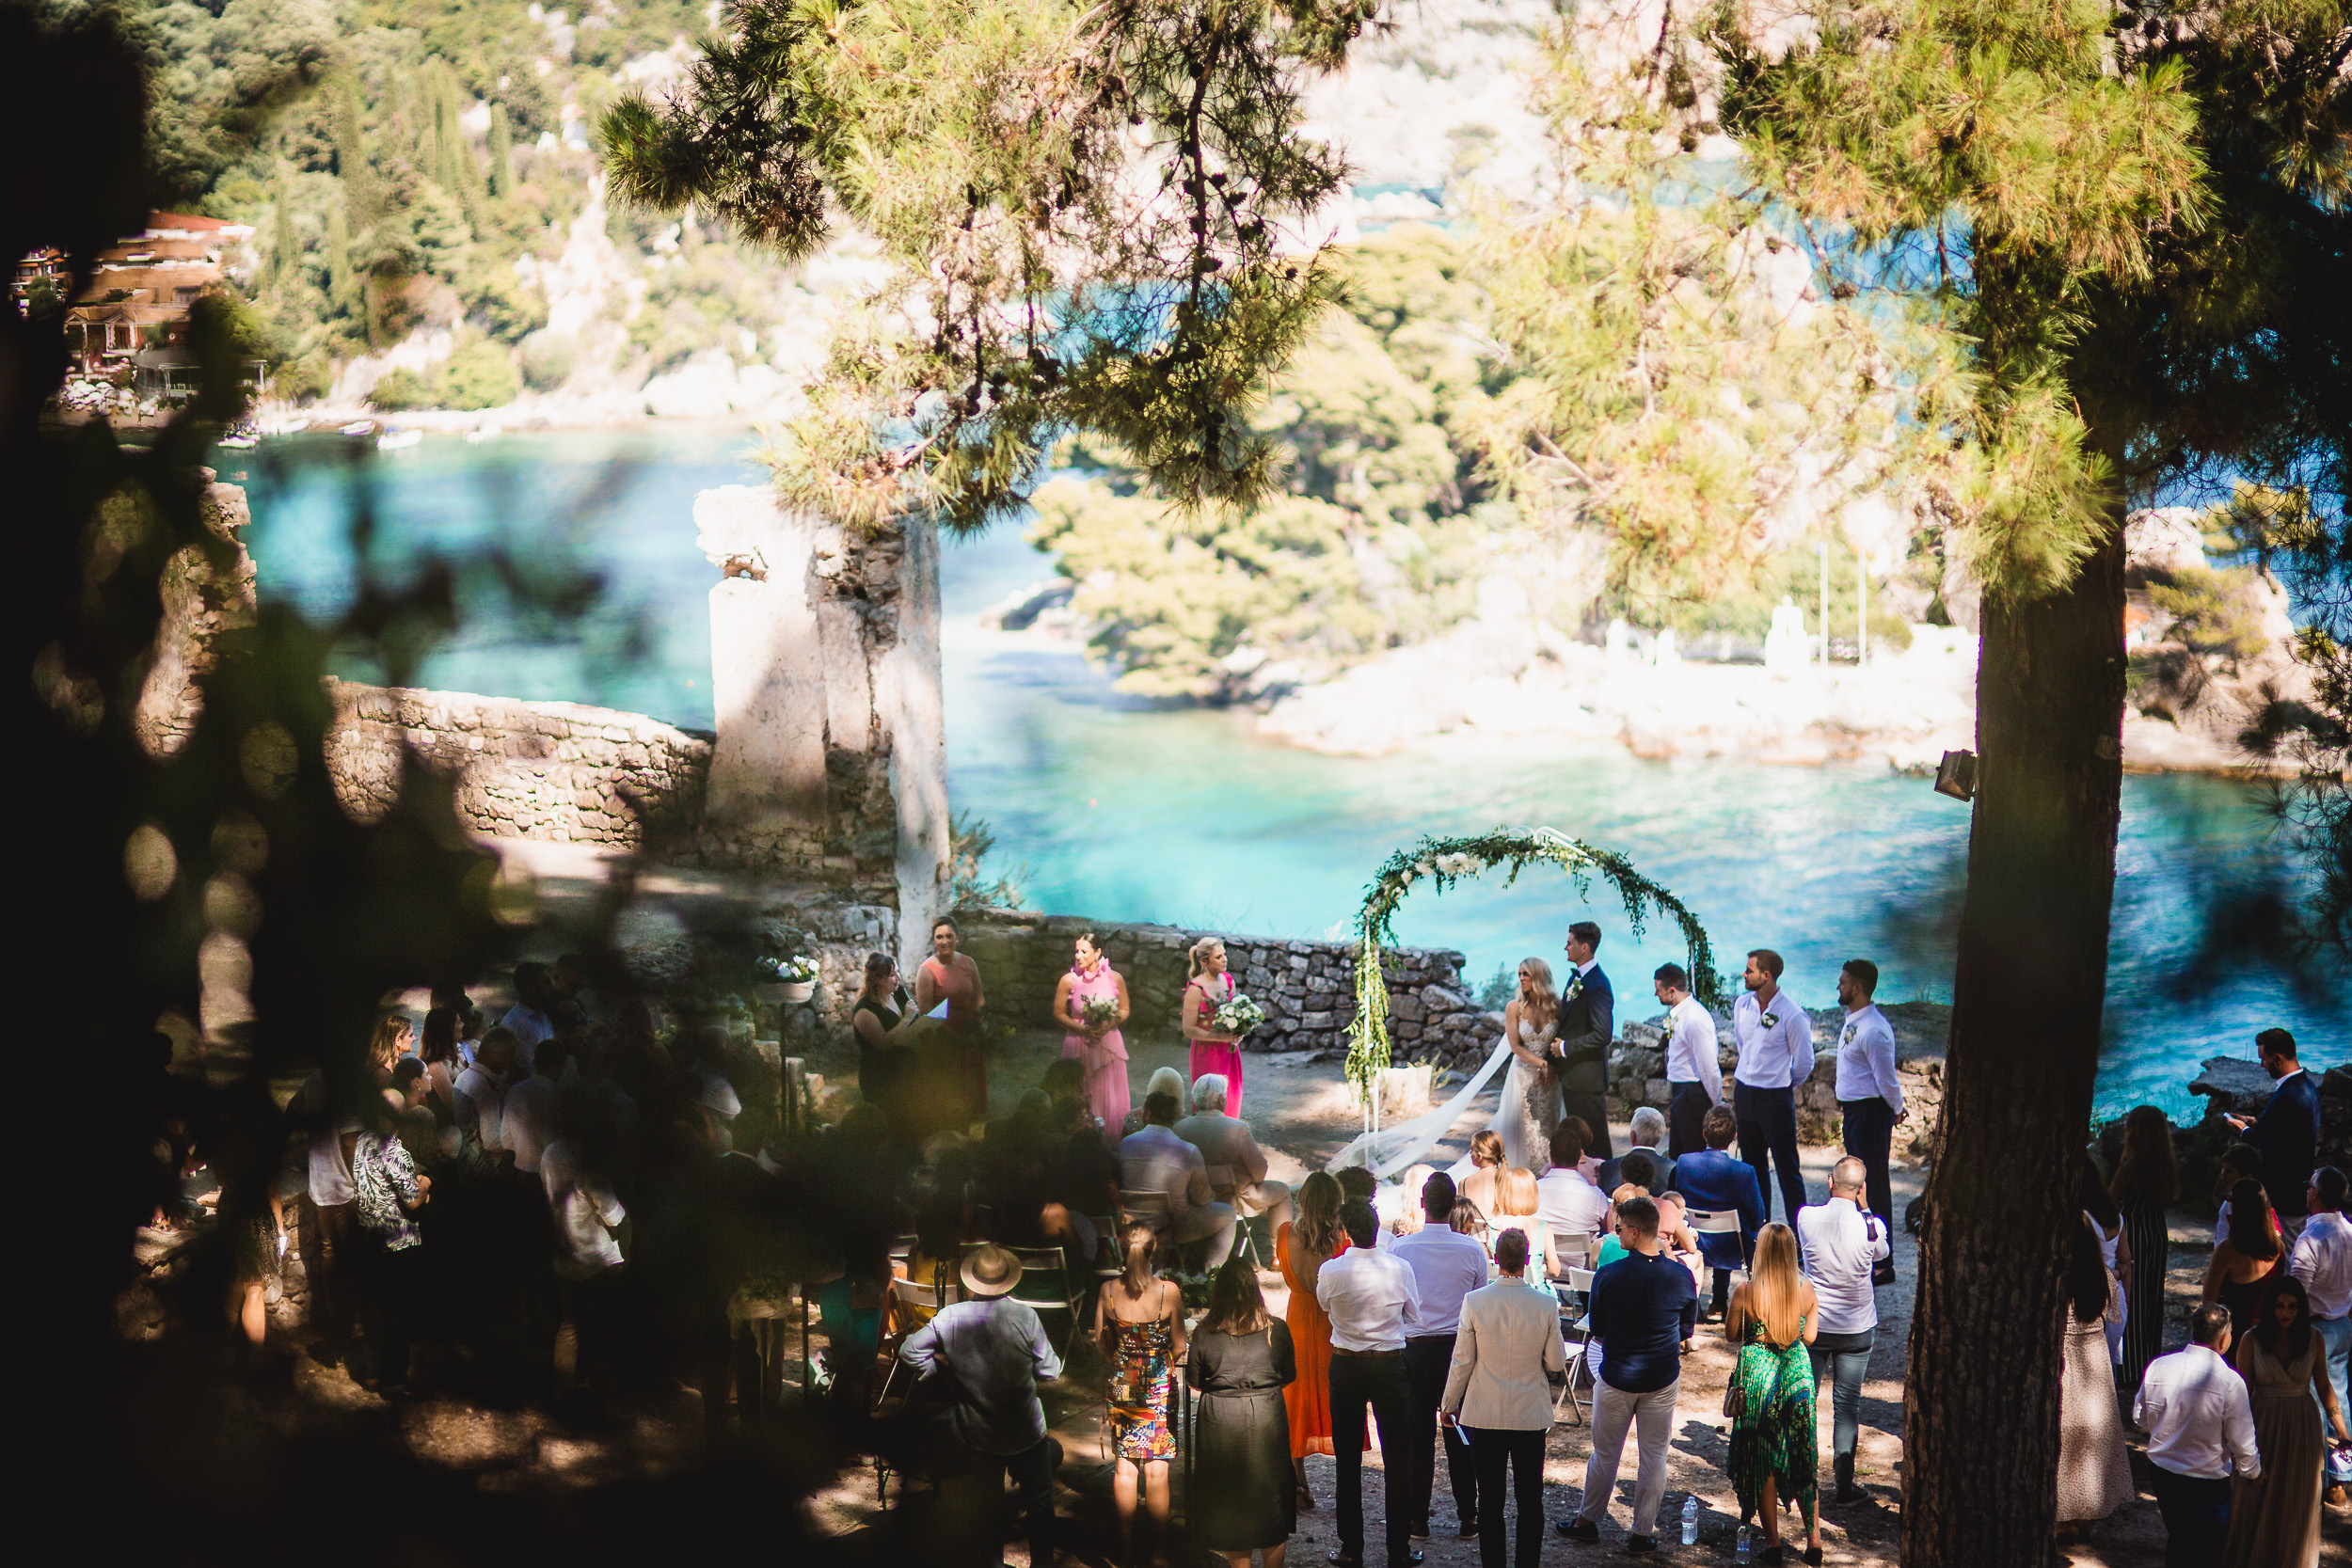 An outdoor wedding ceremony in Croatia with the groom and bride posing for wedding photos.